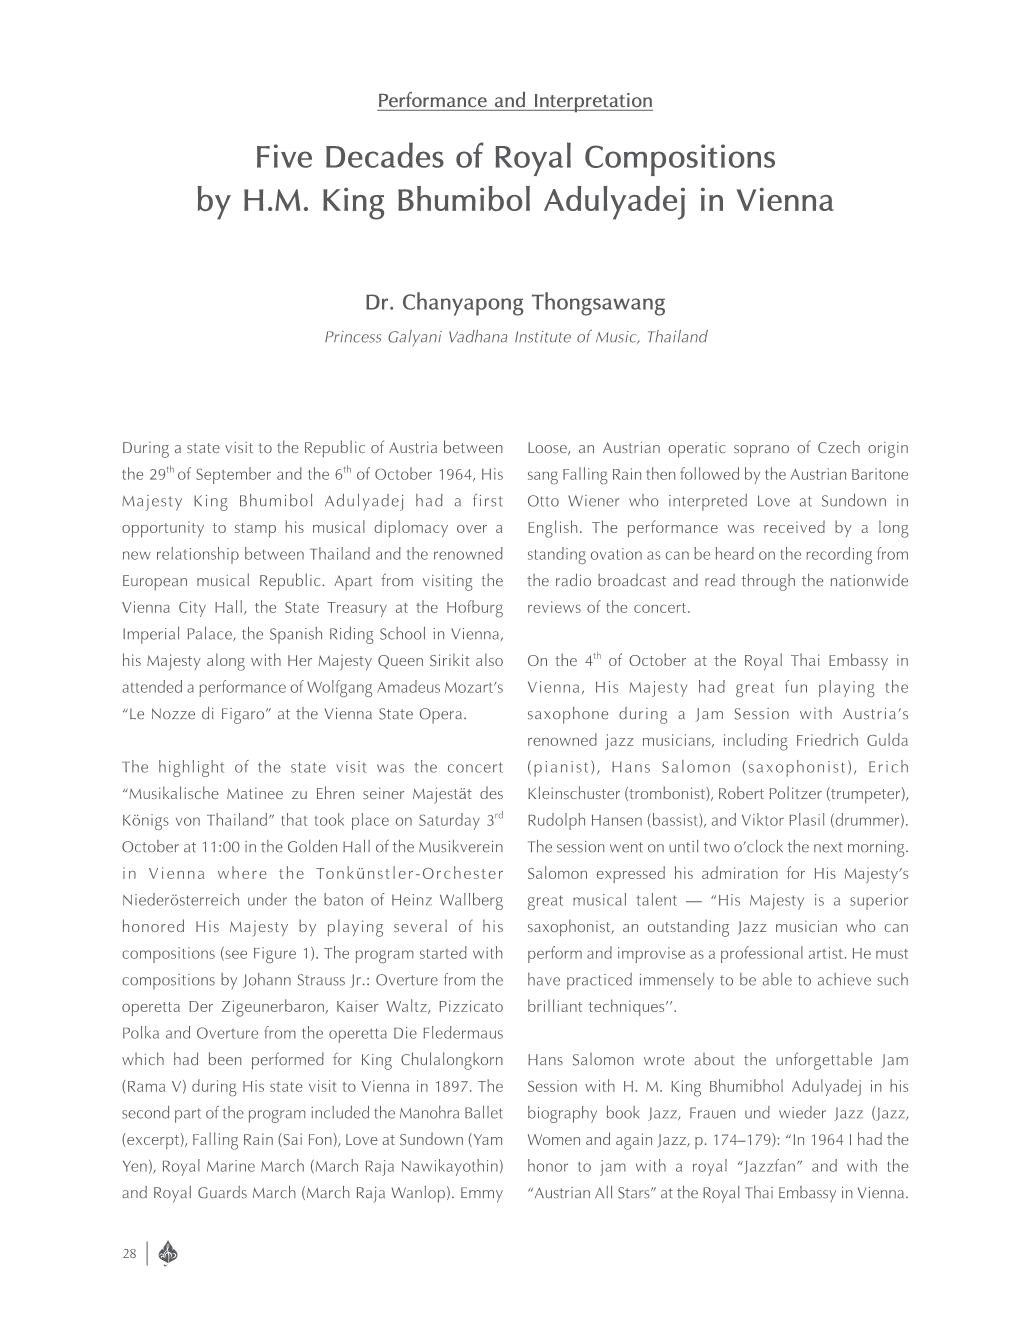 Five Decades of Royal Compositions by H.M. King Bhumibol Adulyadej in Vienna